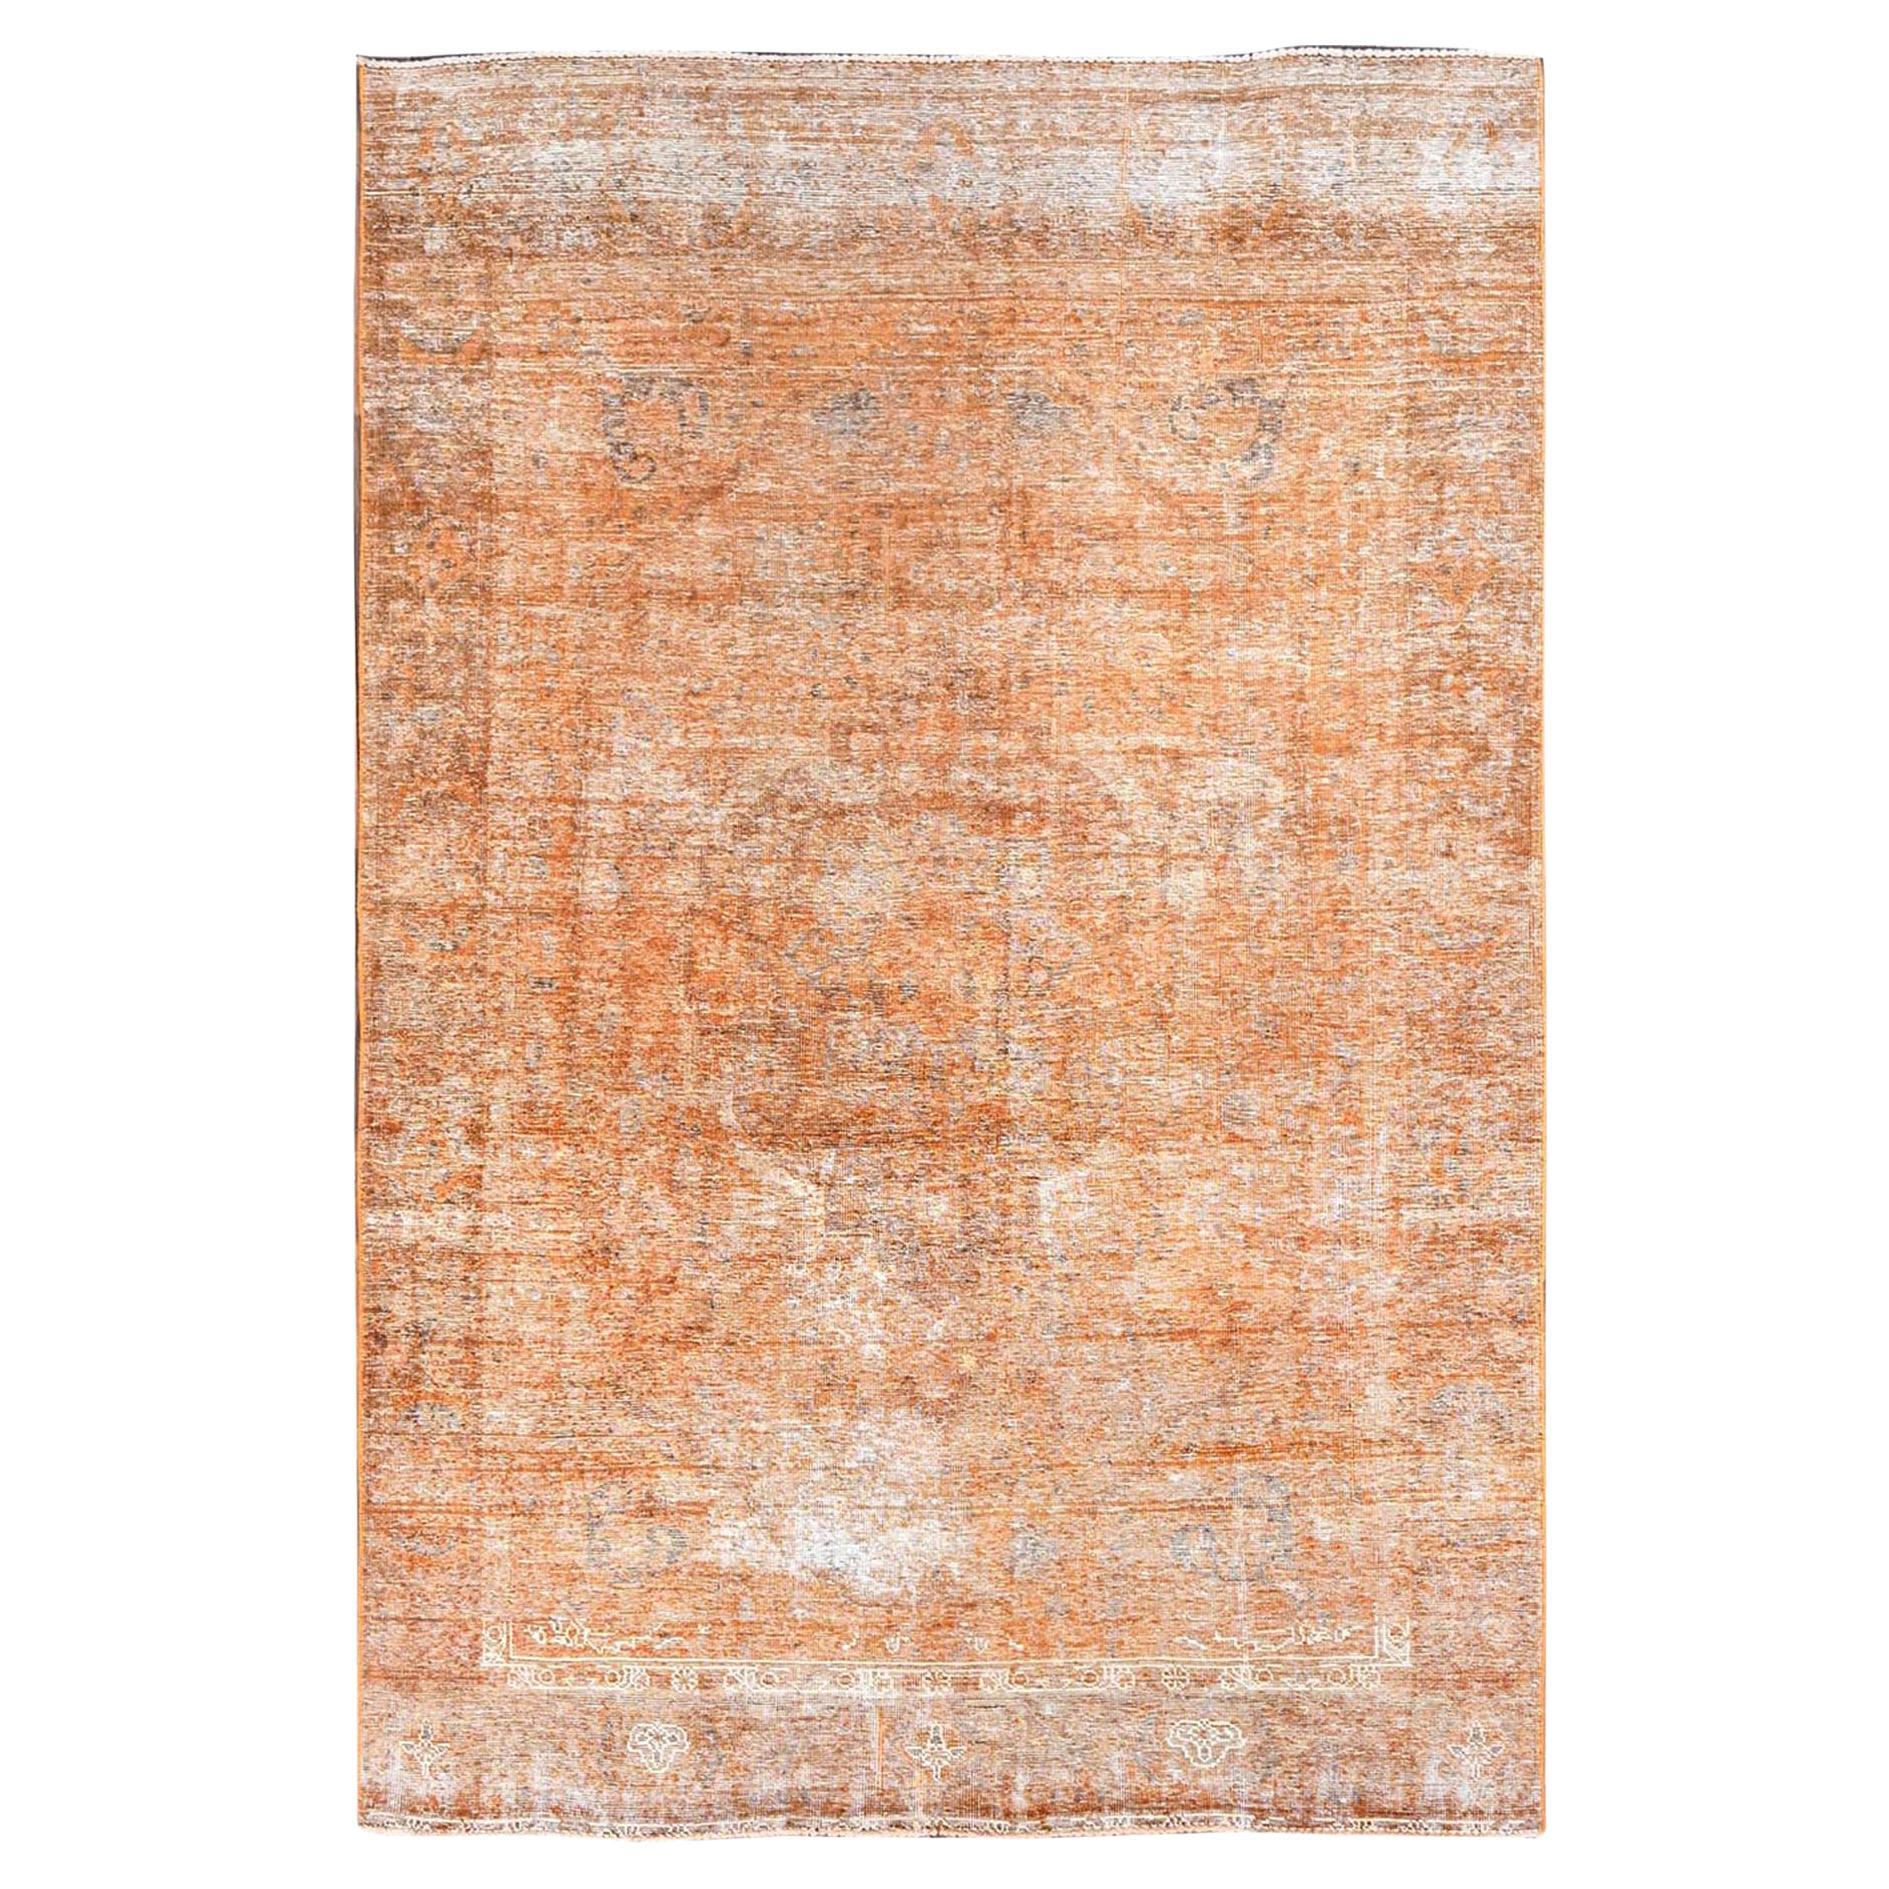 Orange Overdyed Old Persian Tabriz Distressed Evenly Worn Hand Knotted Wool Rug